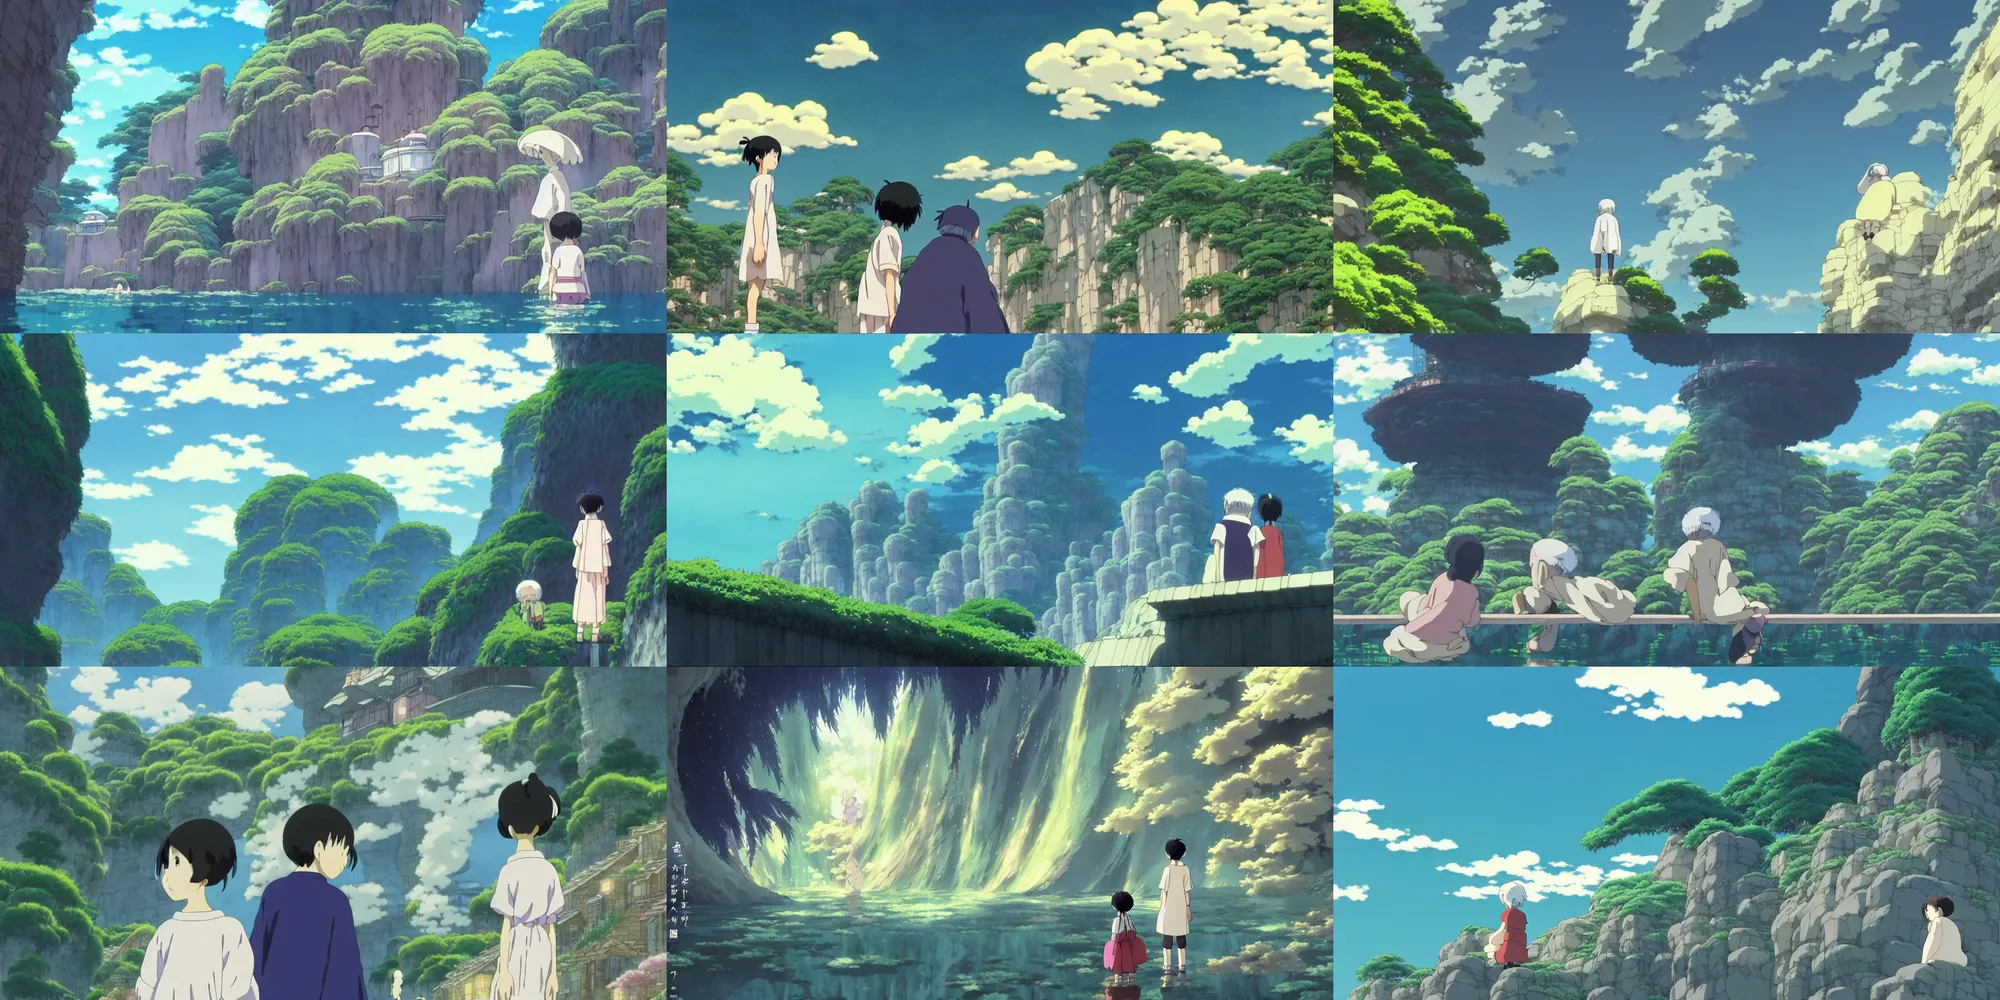 Prompt: a storybook illustration by Studio Ghibli, magical realism, an anime grandpa on an action adventure the otherworldly spirit world, painting by kazuo oga in the anime film, screenshot from the anime film Spirited Away by Makoto Shinkai